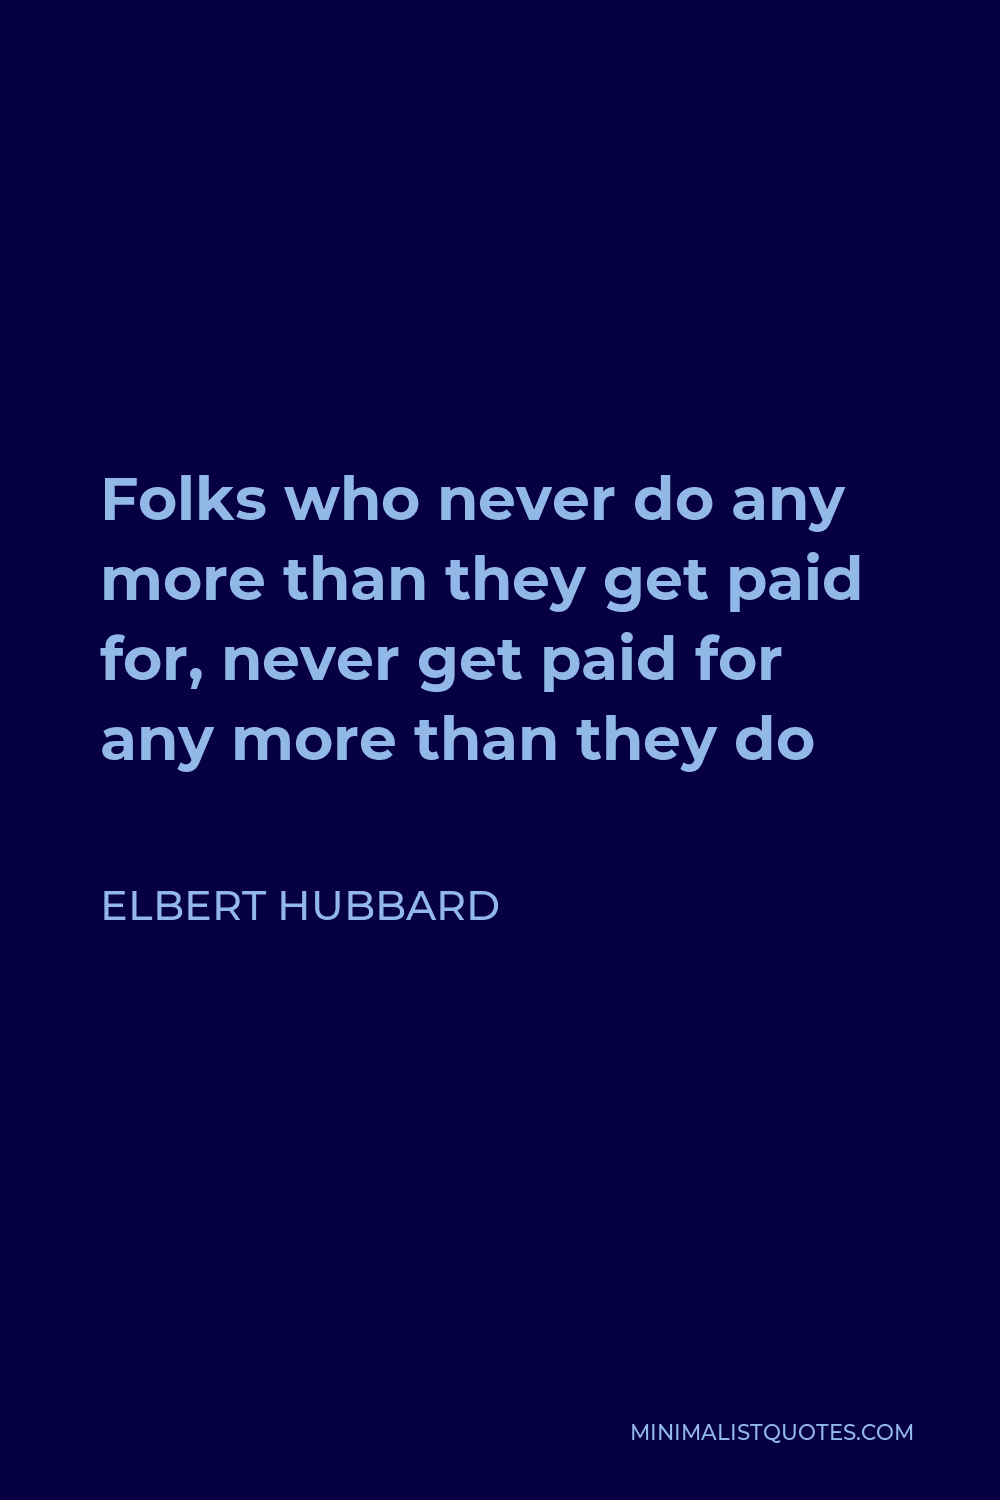 Elbert Hubbard Quote - Folks who never do any more than they get paid for, never get paid for any more than they do